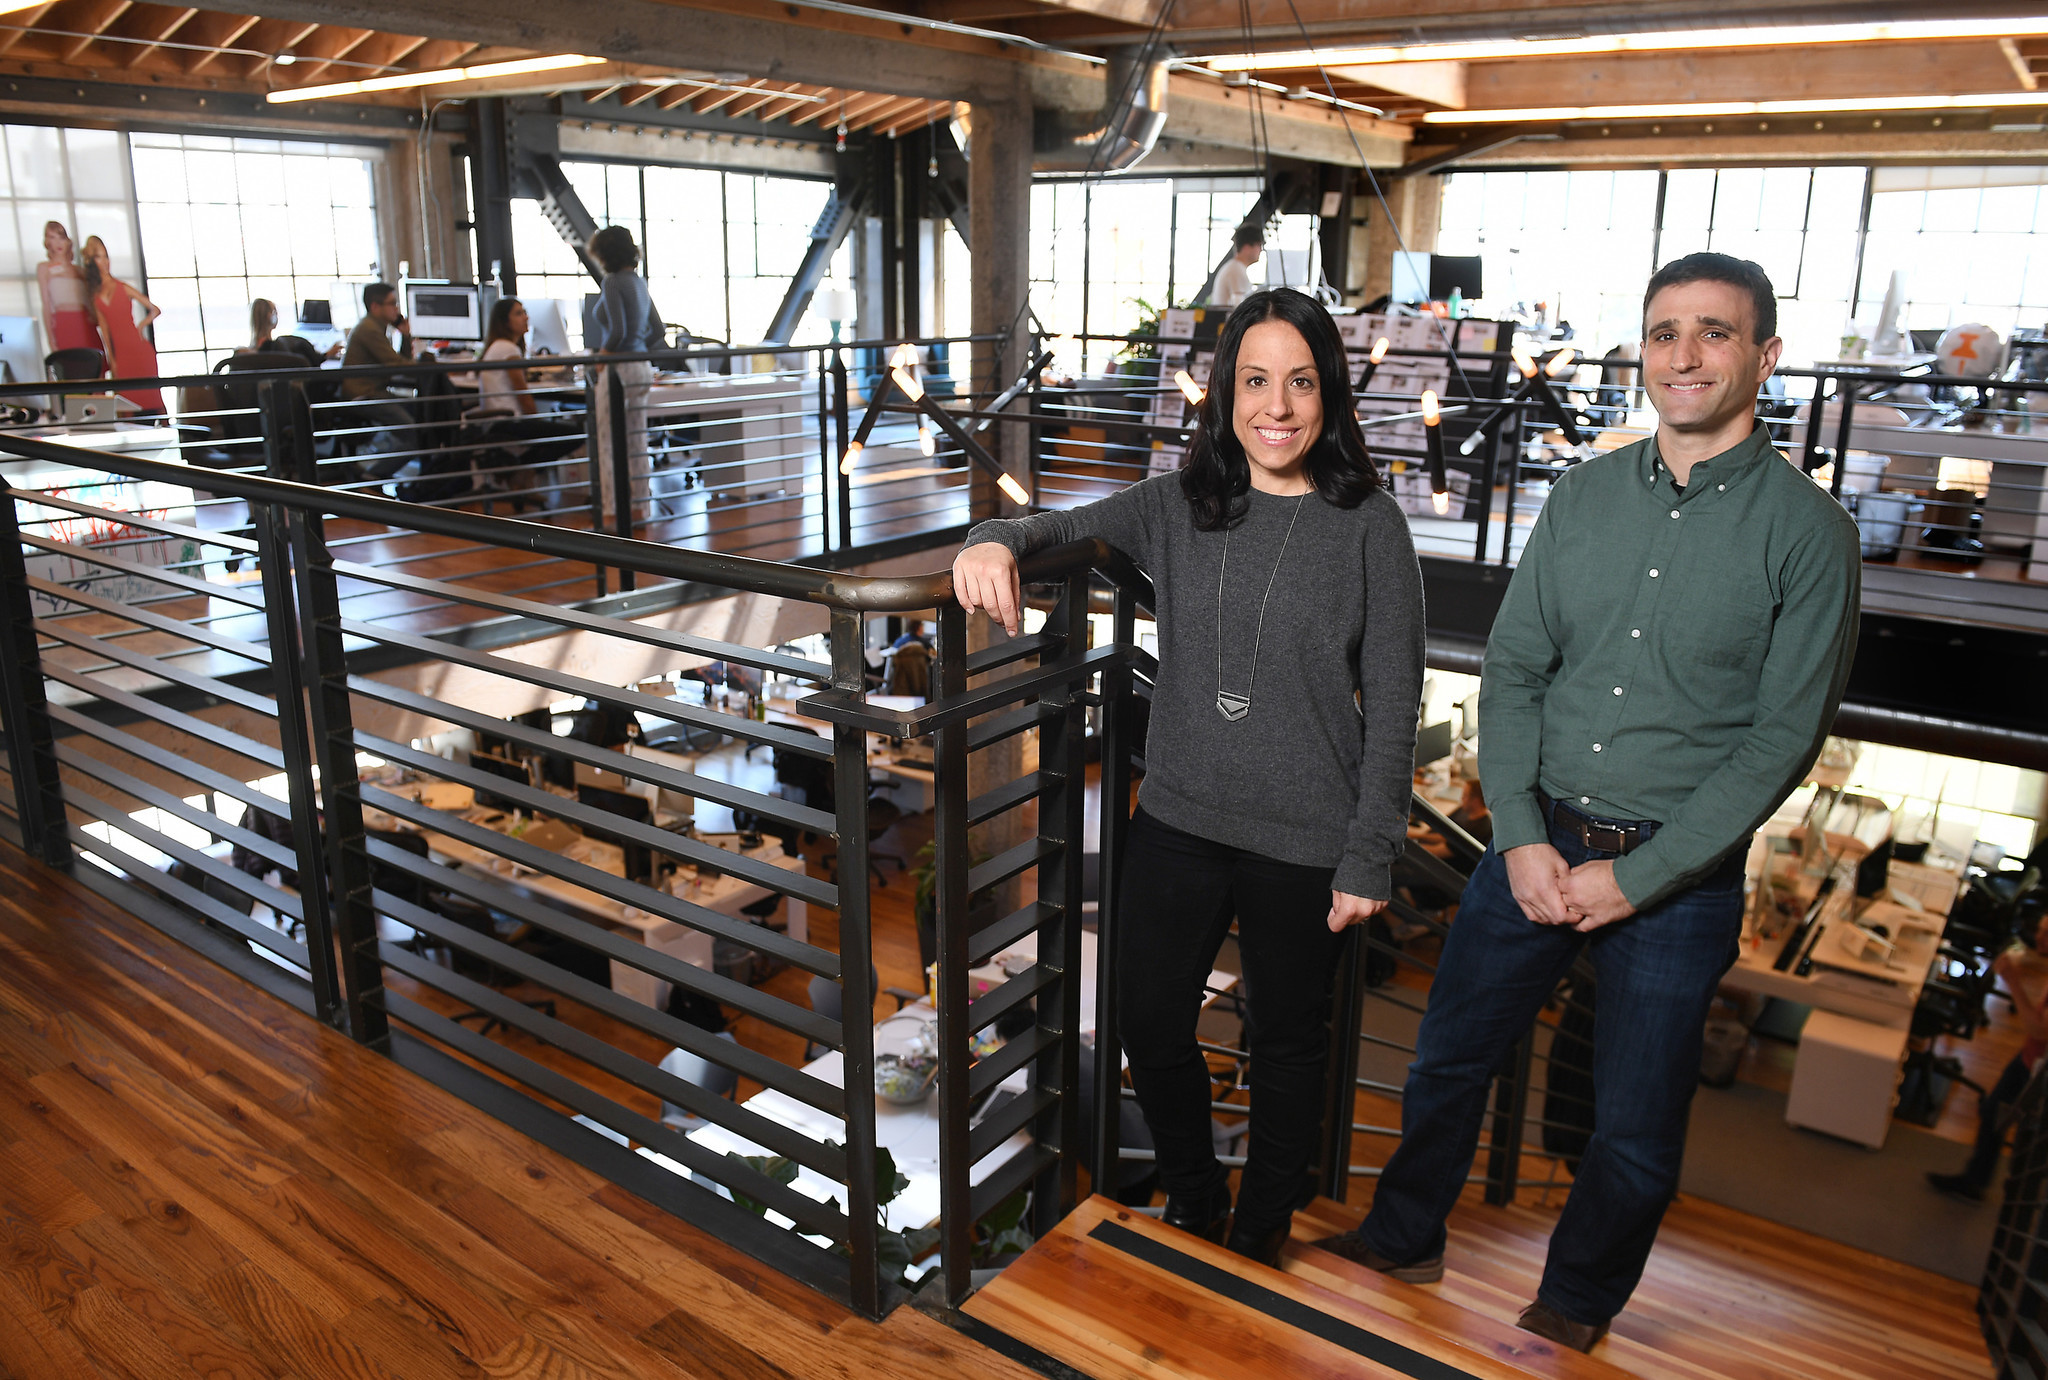 Katie Biber, center, former general counsel for Mitt Romney, and Steven Siger, right, who worked for President Obama, are now attorneys at Thumbtack in San Francisco.